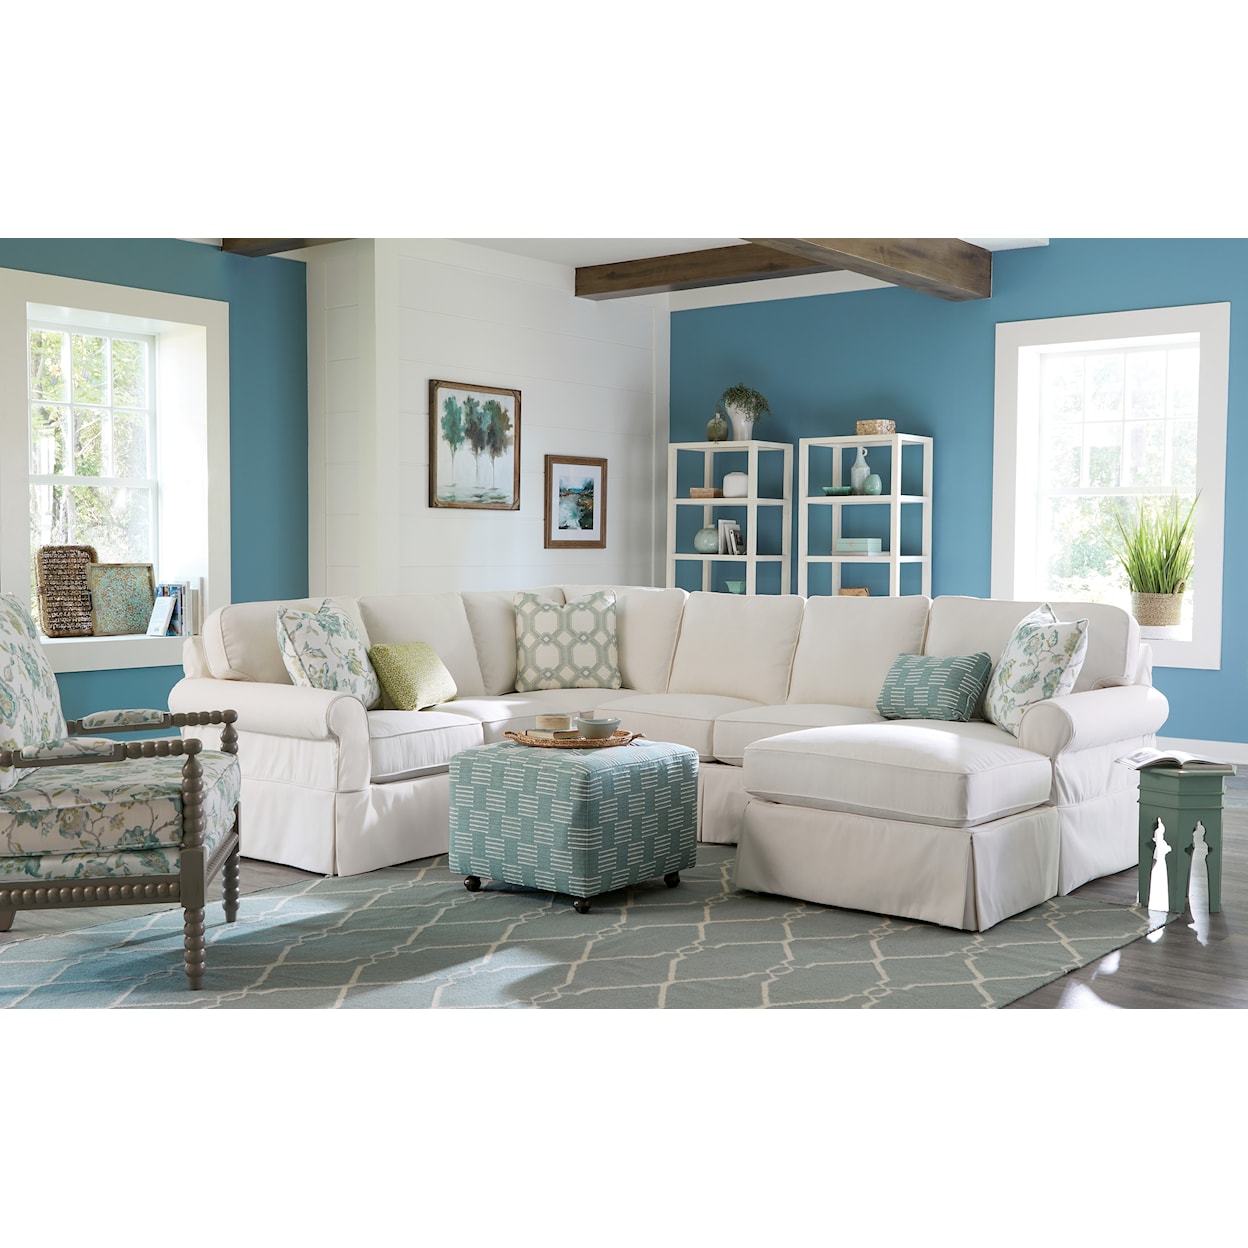 Craftmaster 917450BD 3-Pc Slipcover Sectional Sofa w/ RAF Chaise